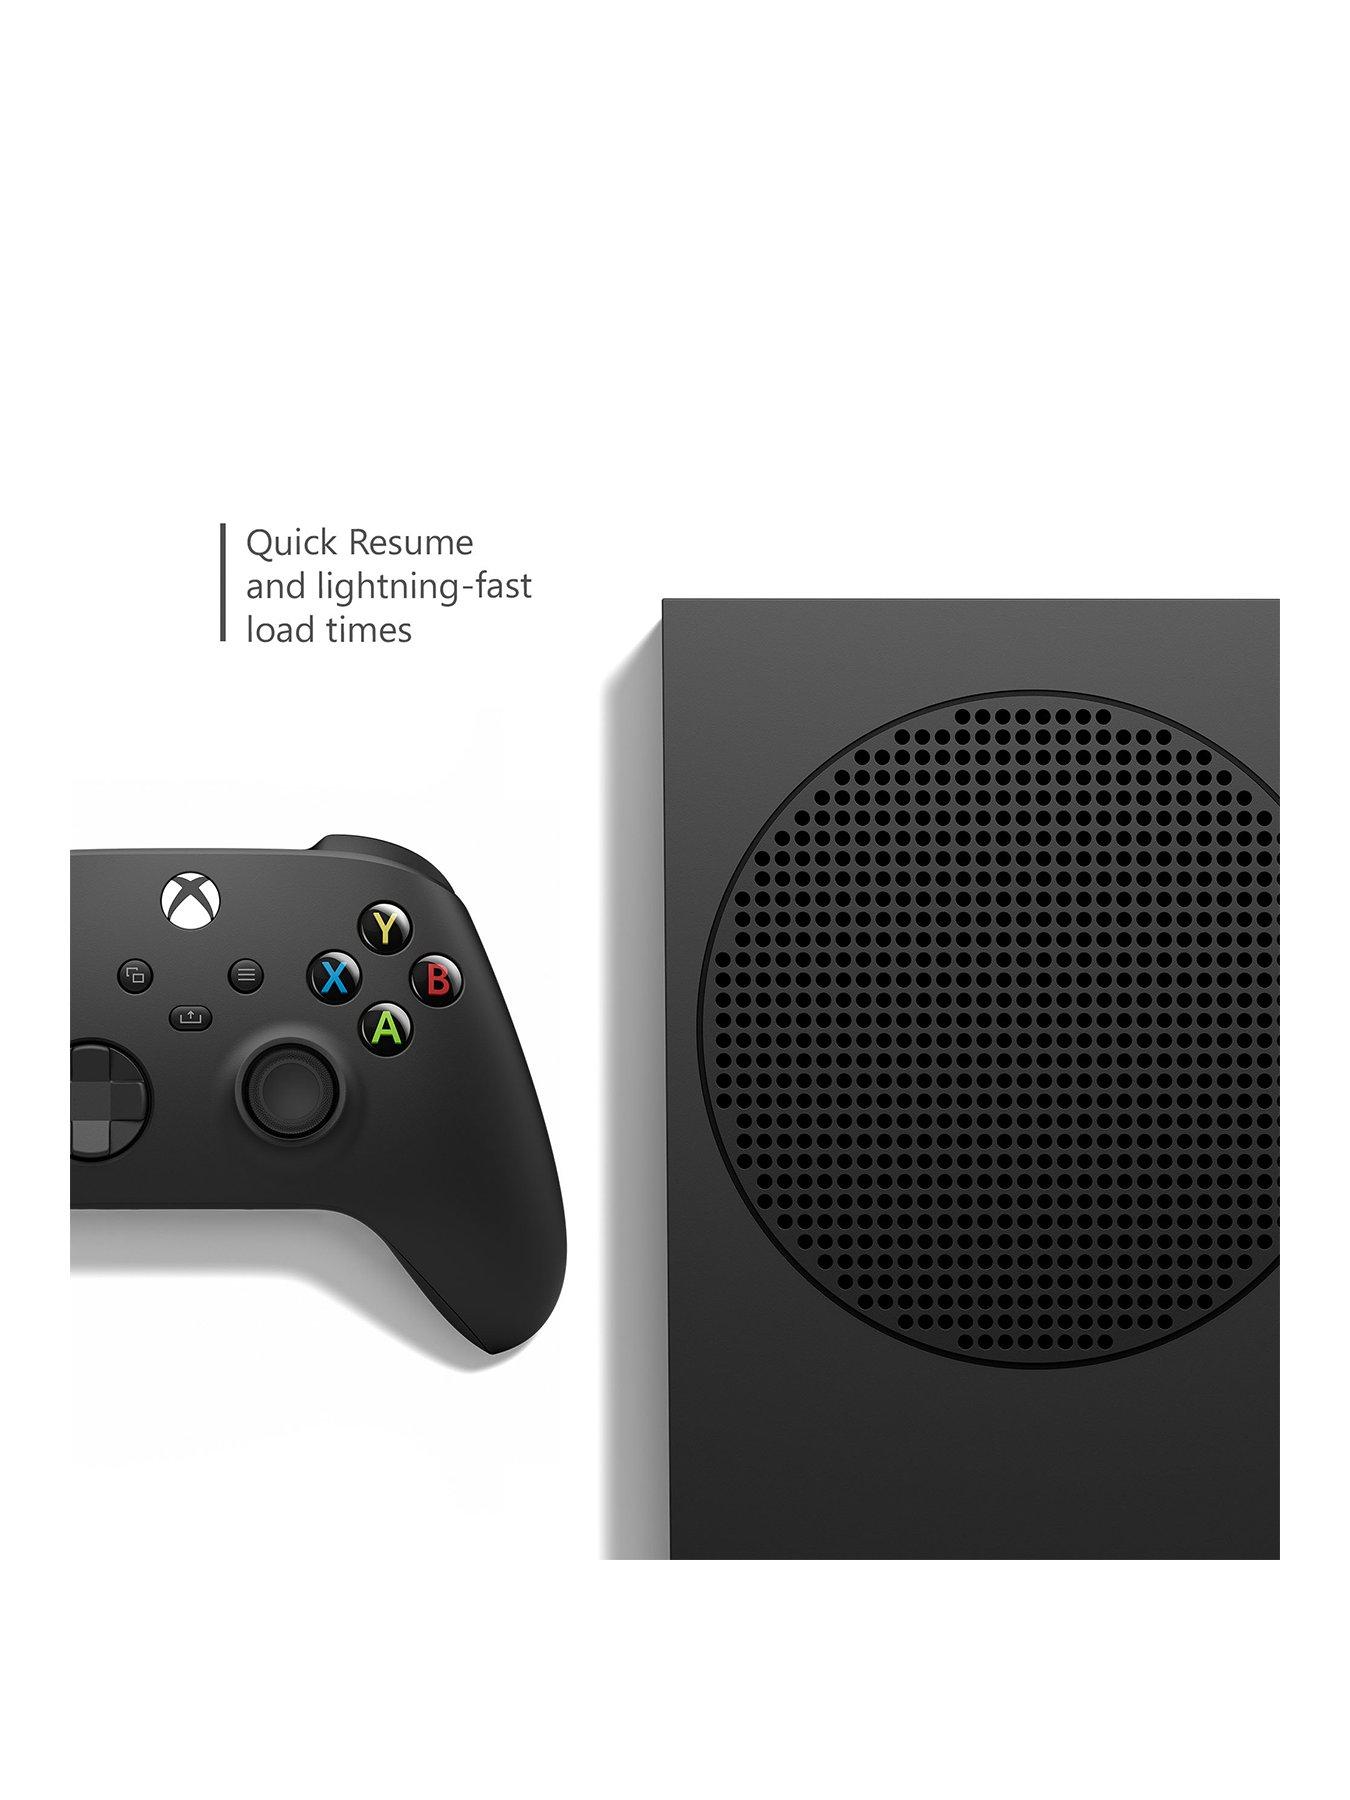 Xbox Series X 1TB SSD Console + Extra Xbox Wireless Controller Carbon Black